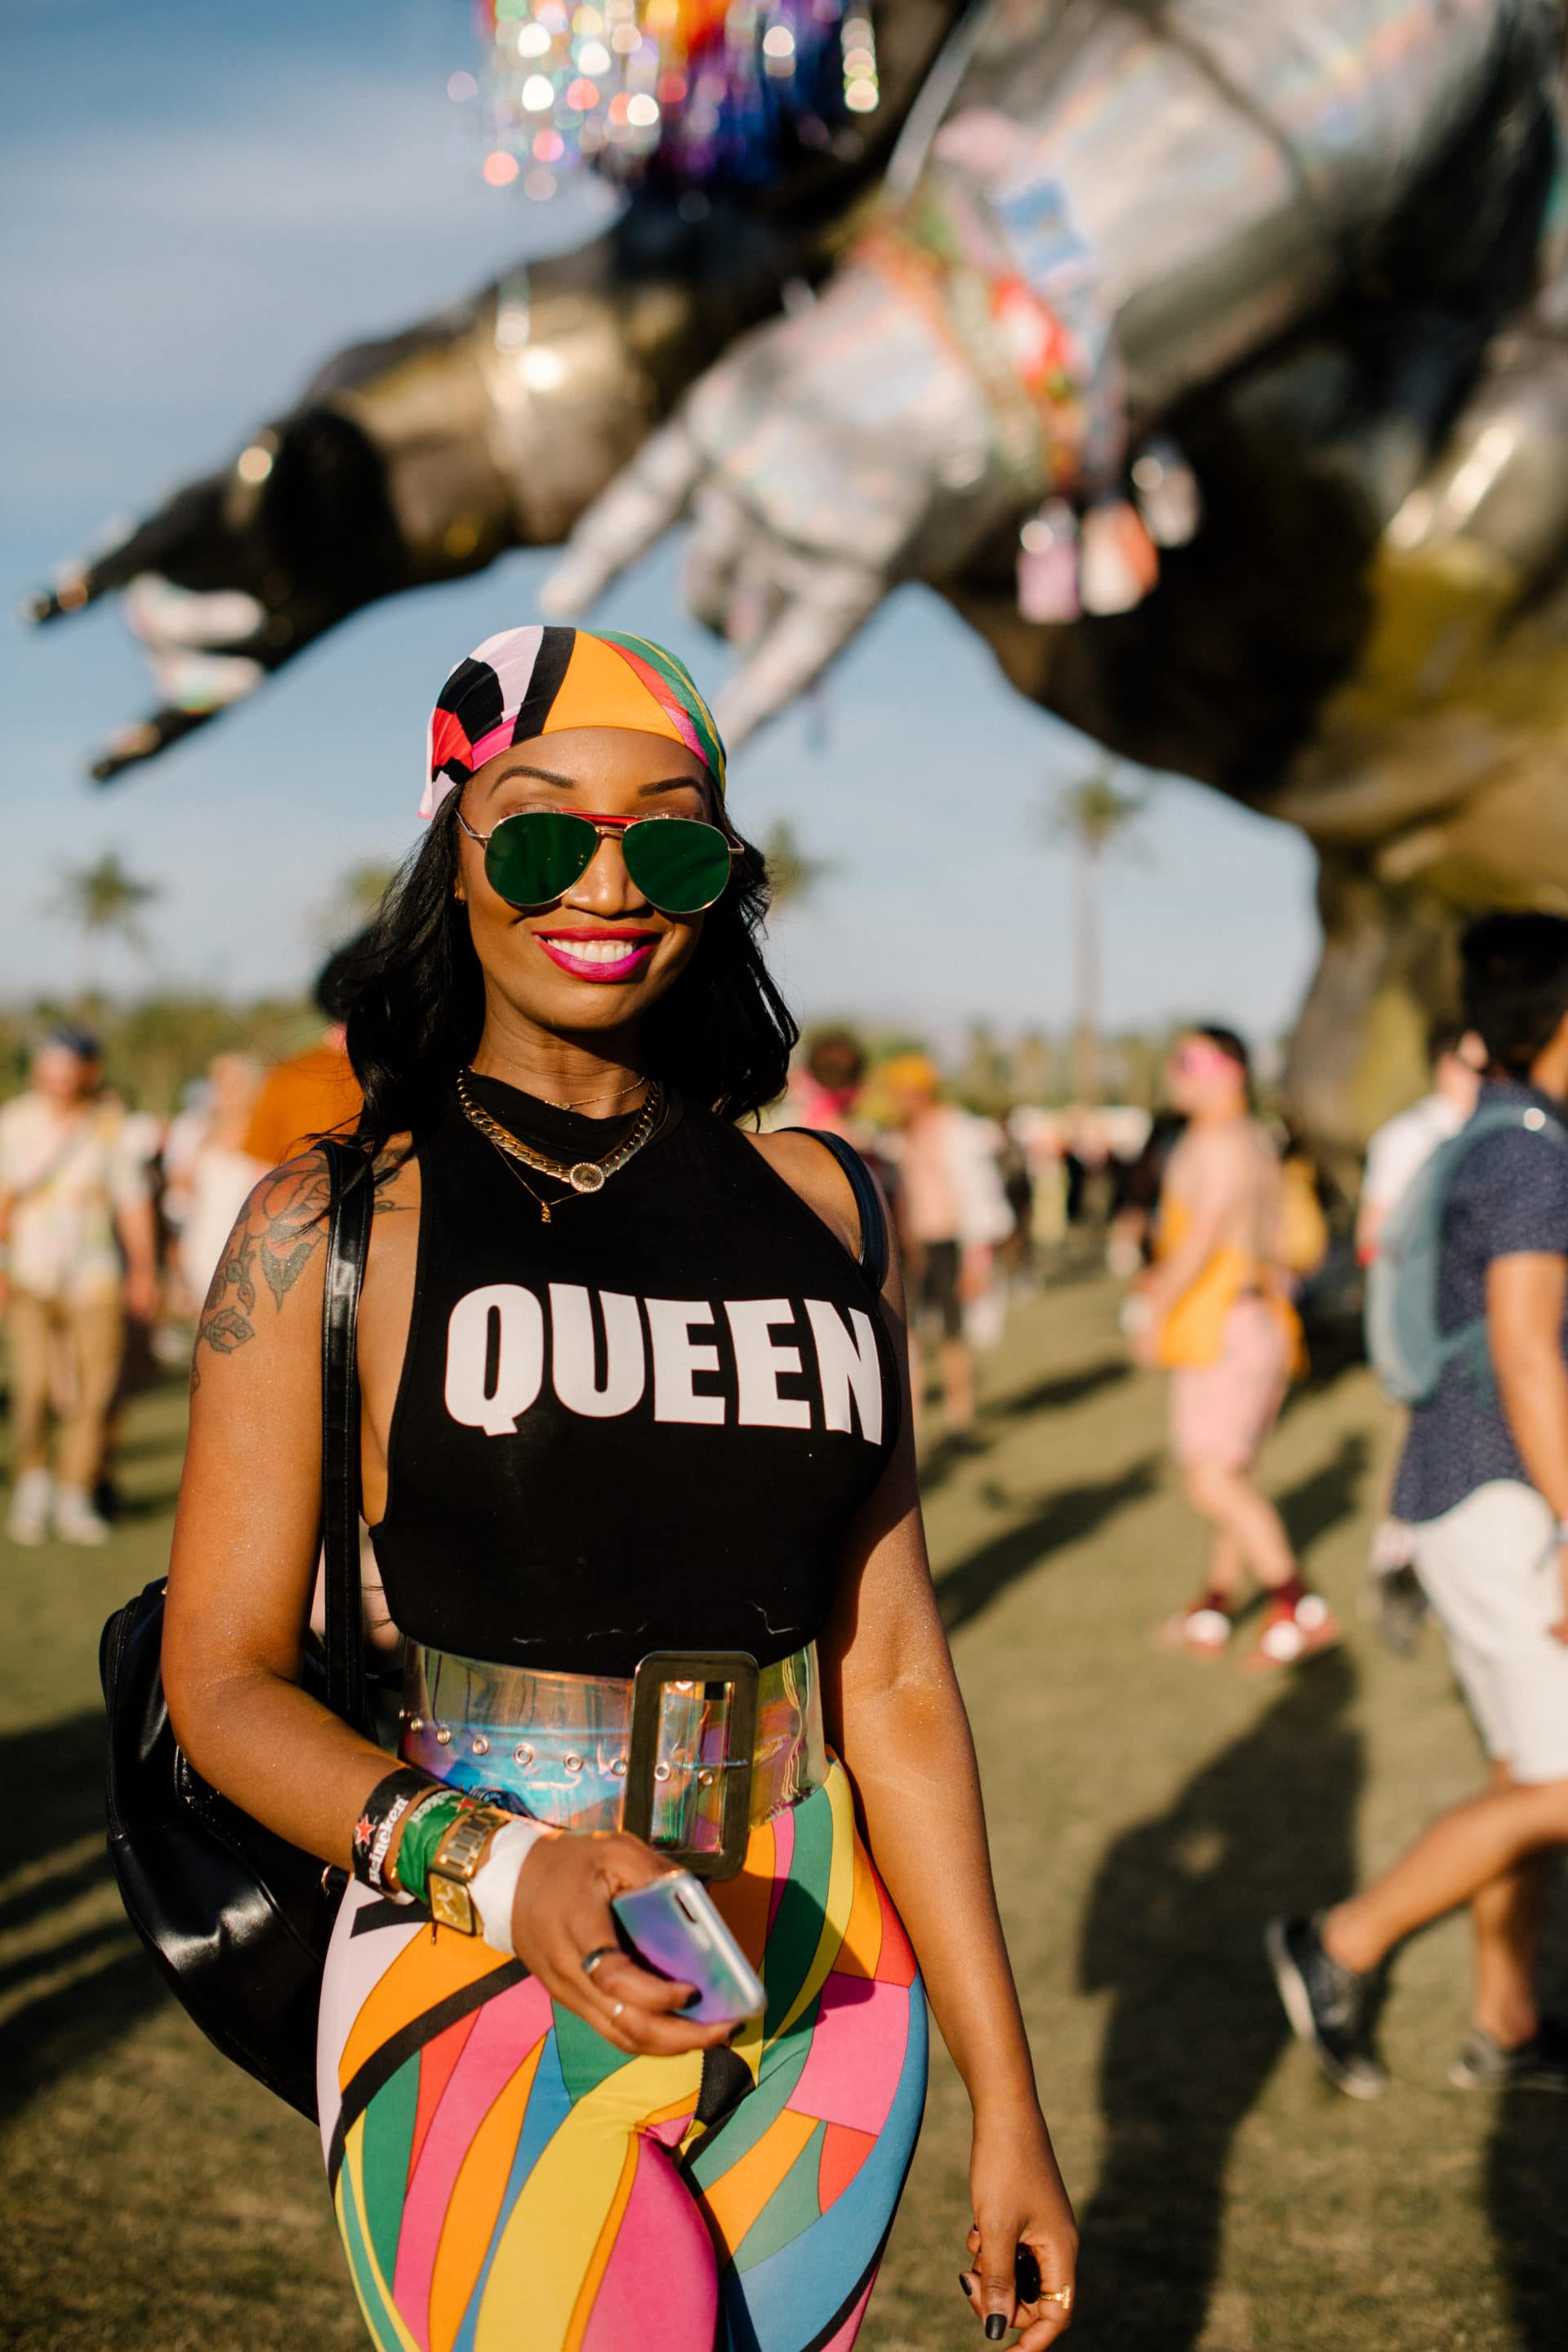 The Best 'Black Girl Magic' Style Moments at Coachella 2019